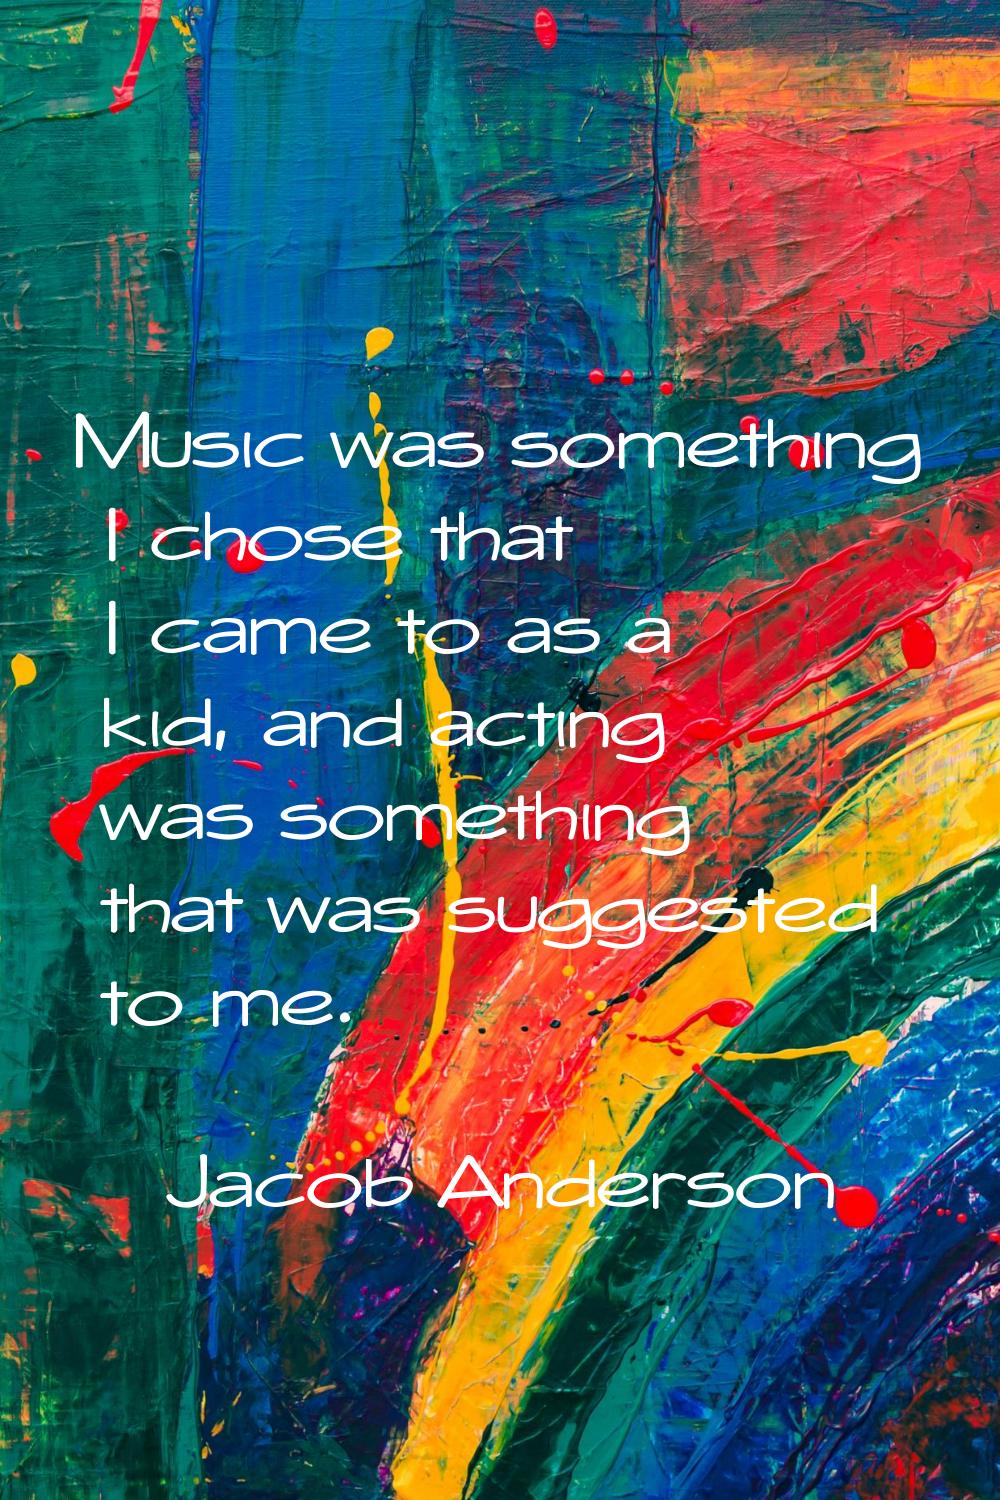 Music was something I chose that I came to as a kid, and acting was something that was suggested to